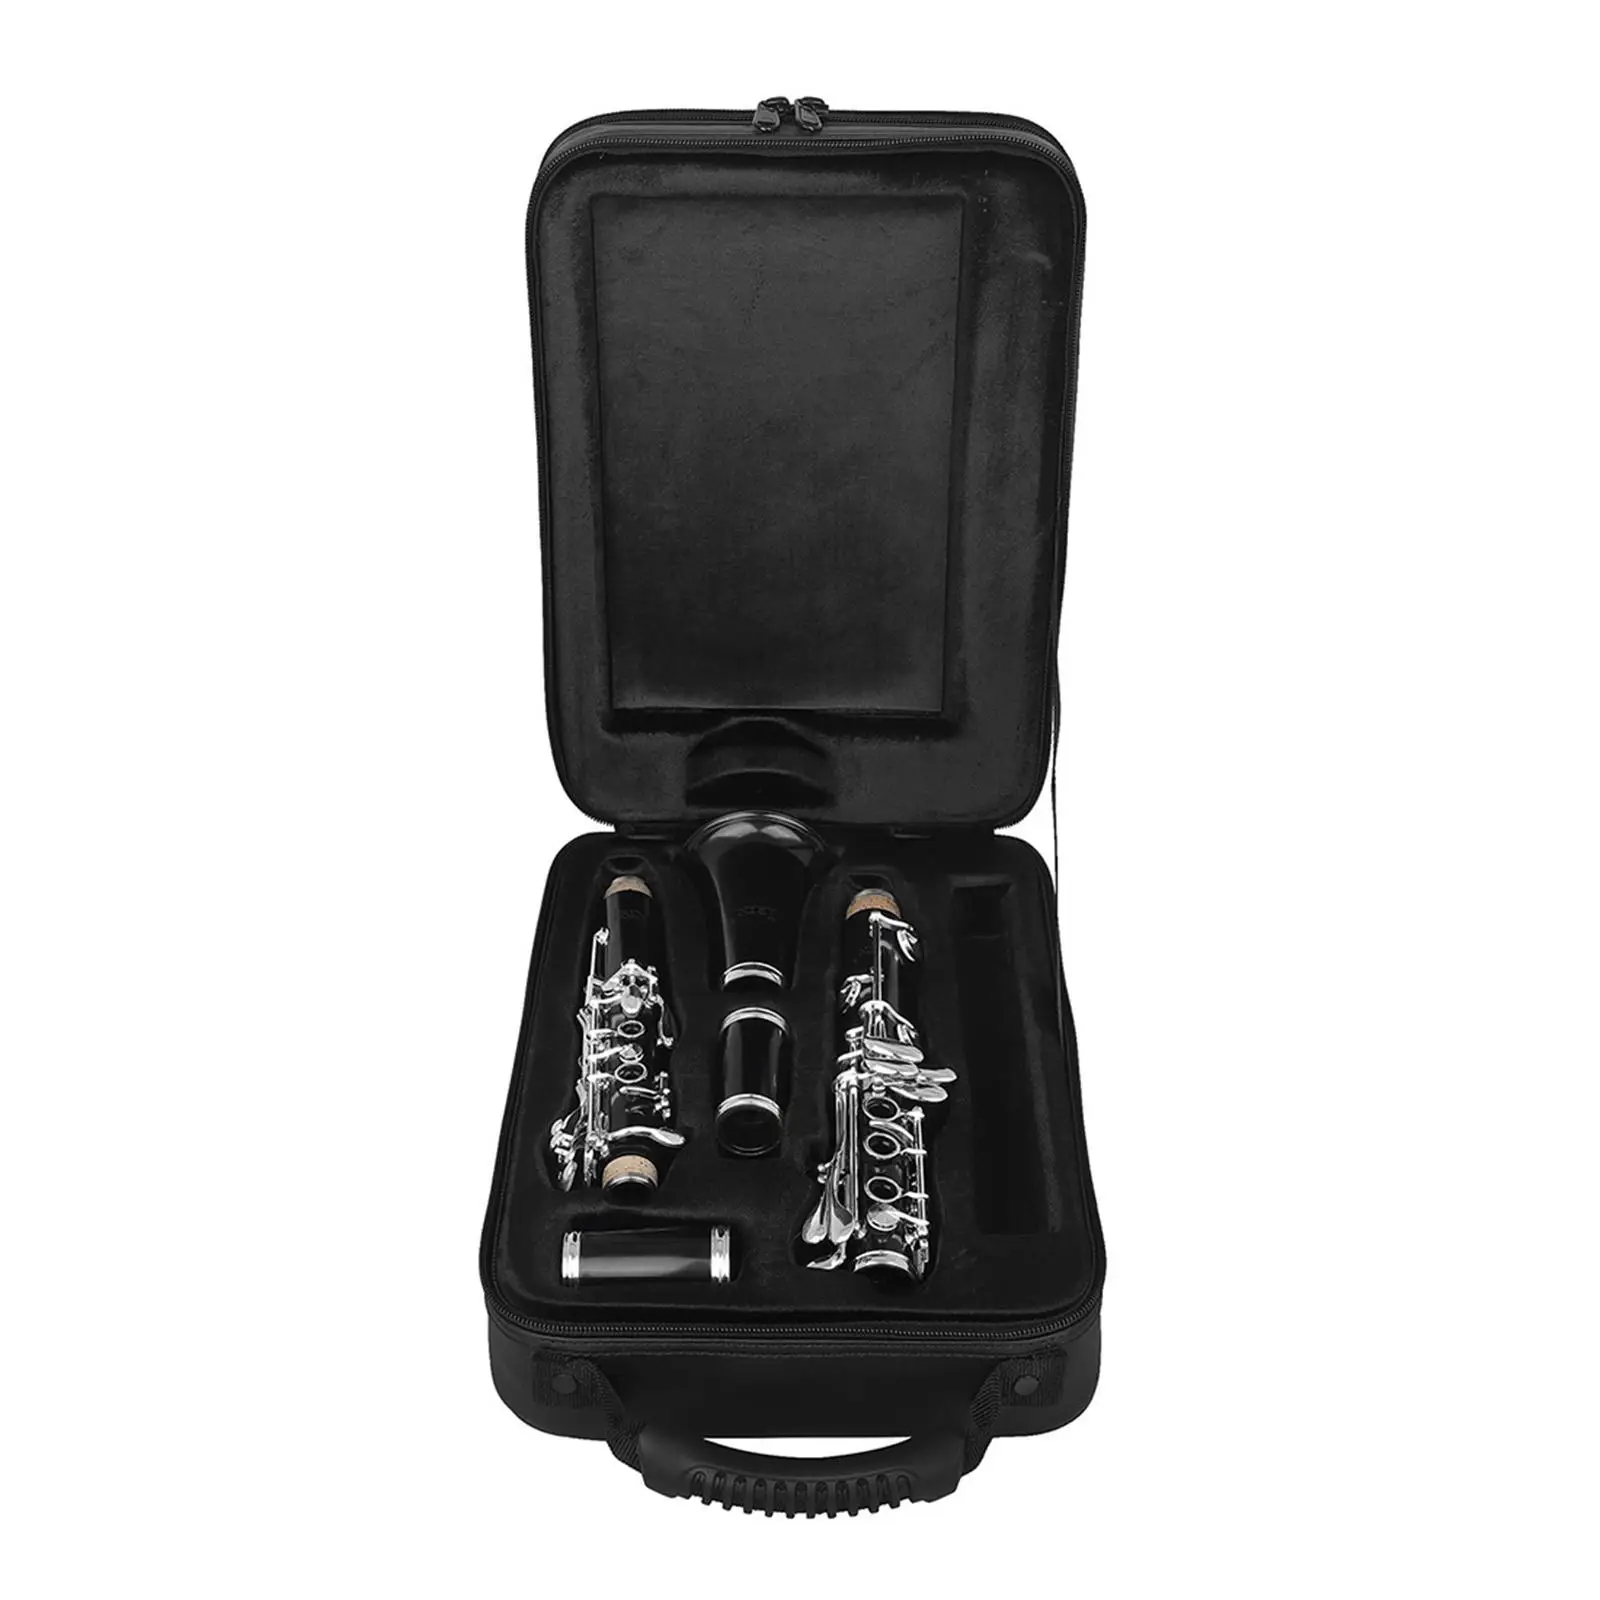 Clarinet Case Clarinet Gig Bag Beginner Case, Durable, Storage Box, PU Leather with Shoulder Strap for Travel Outdoor